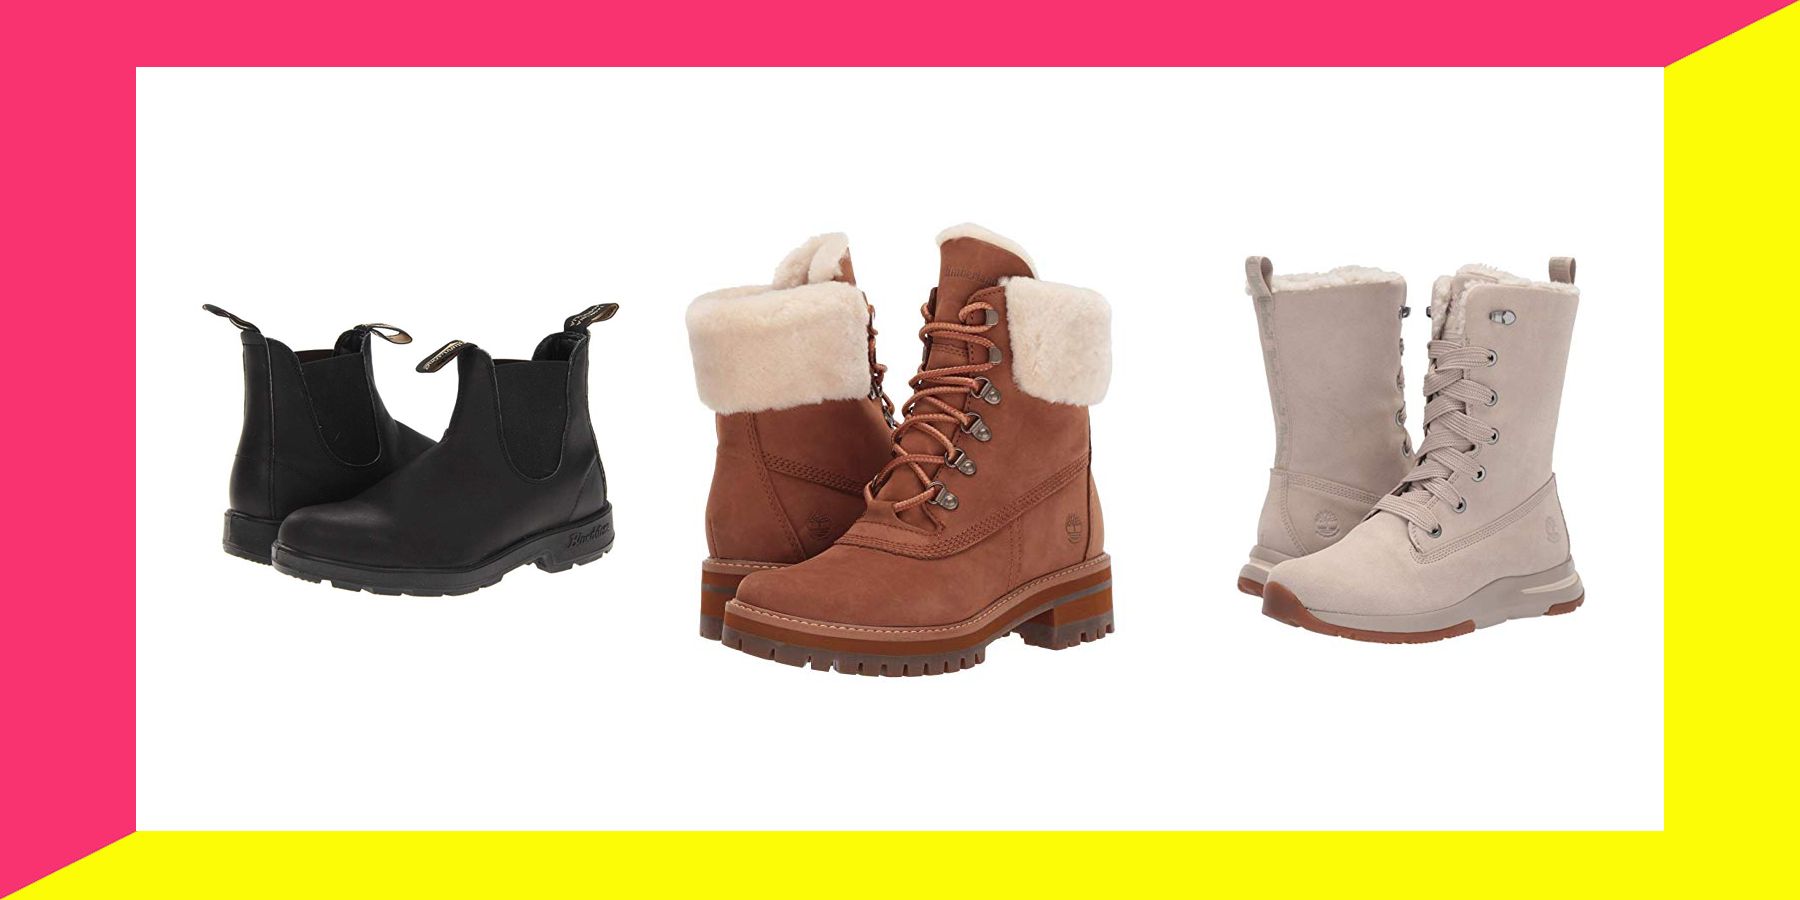 7 Pairs Of Snow Boots On Sale At Zappos 